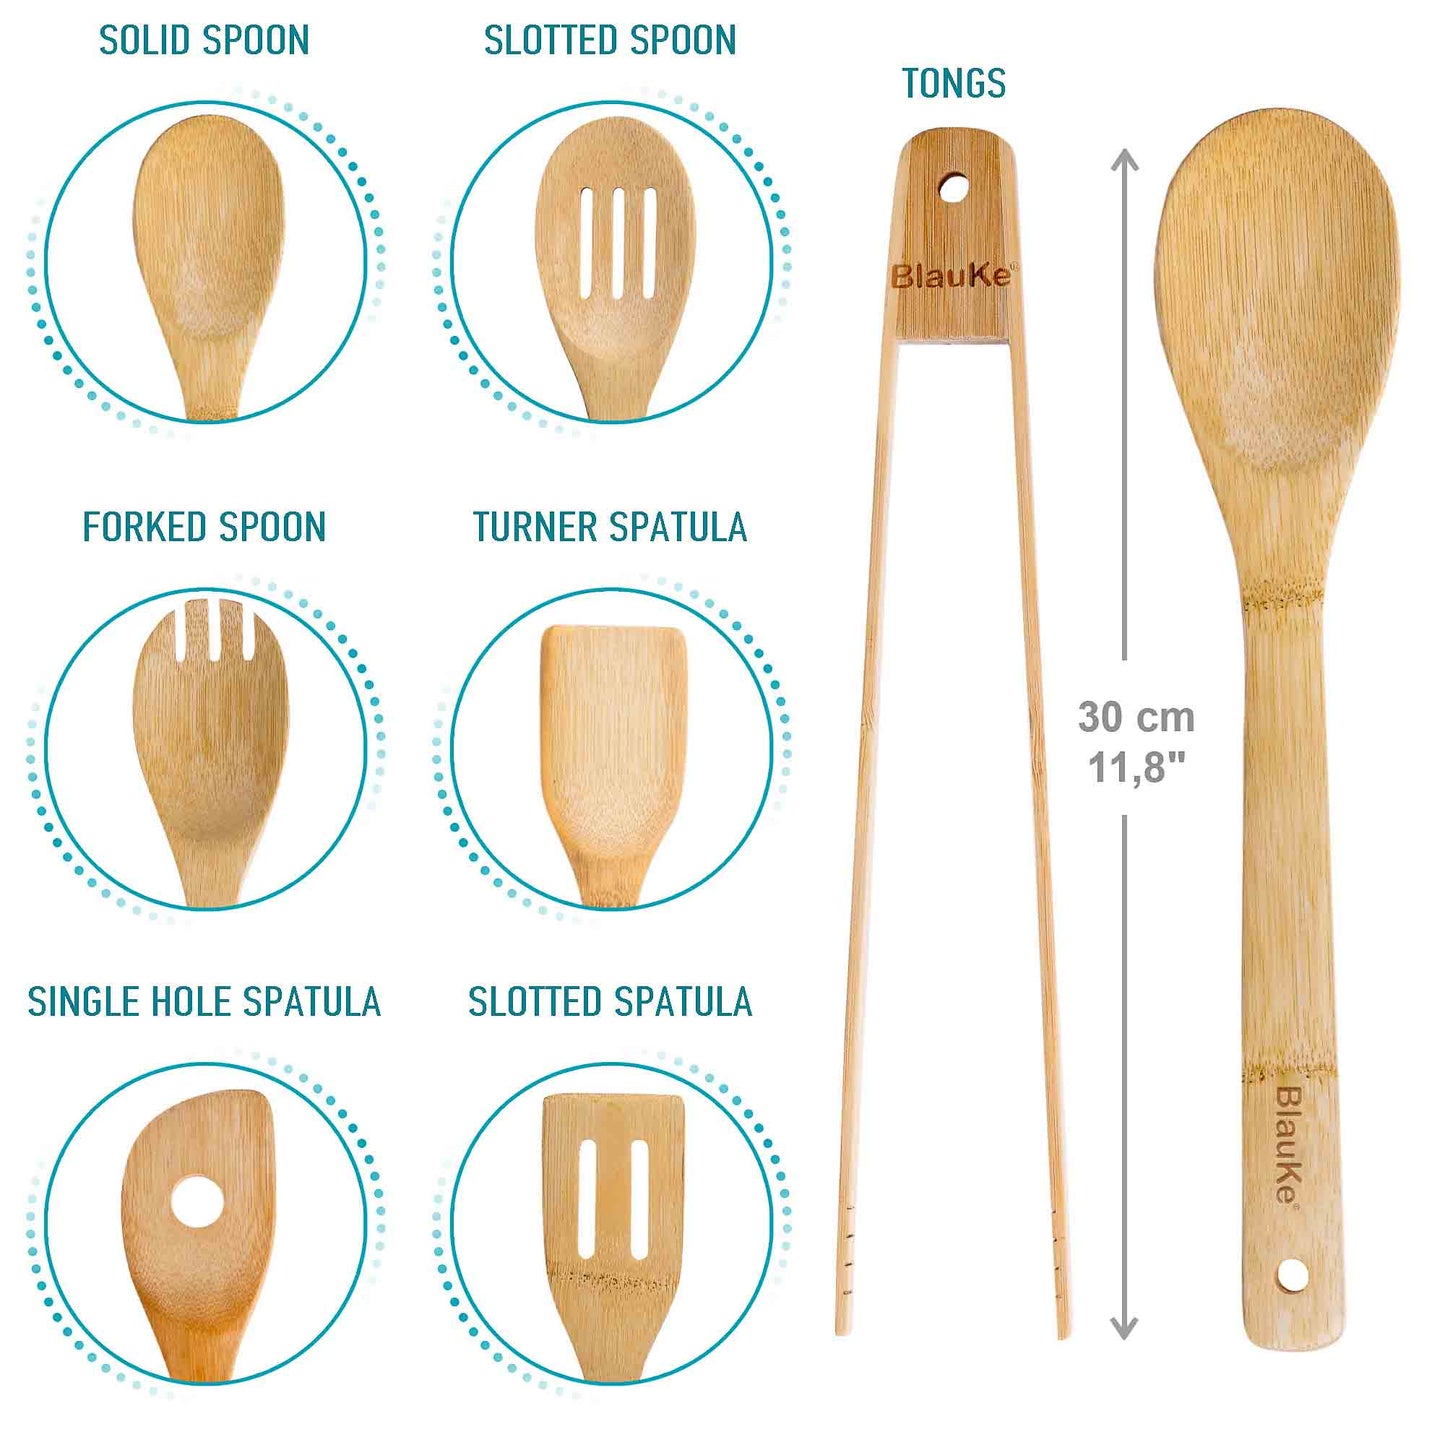 Wooden Spoons for Cooking 7-Pack - Bamboo Kitchen Utensils Set